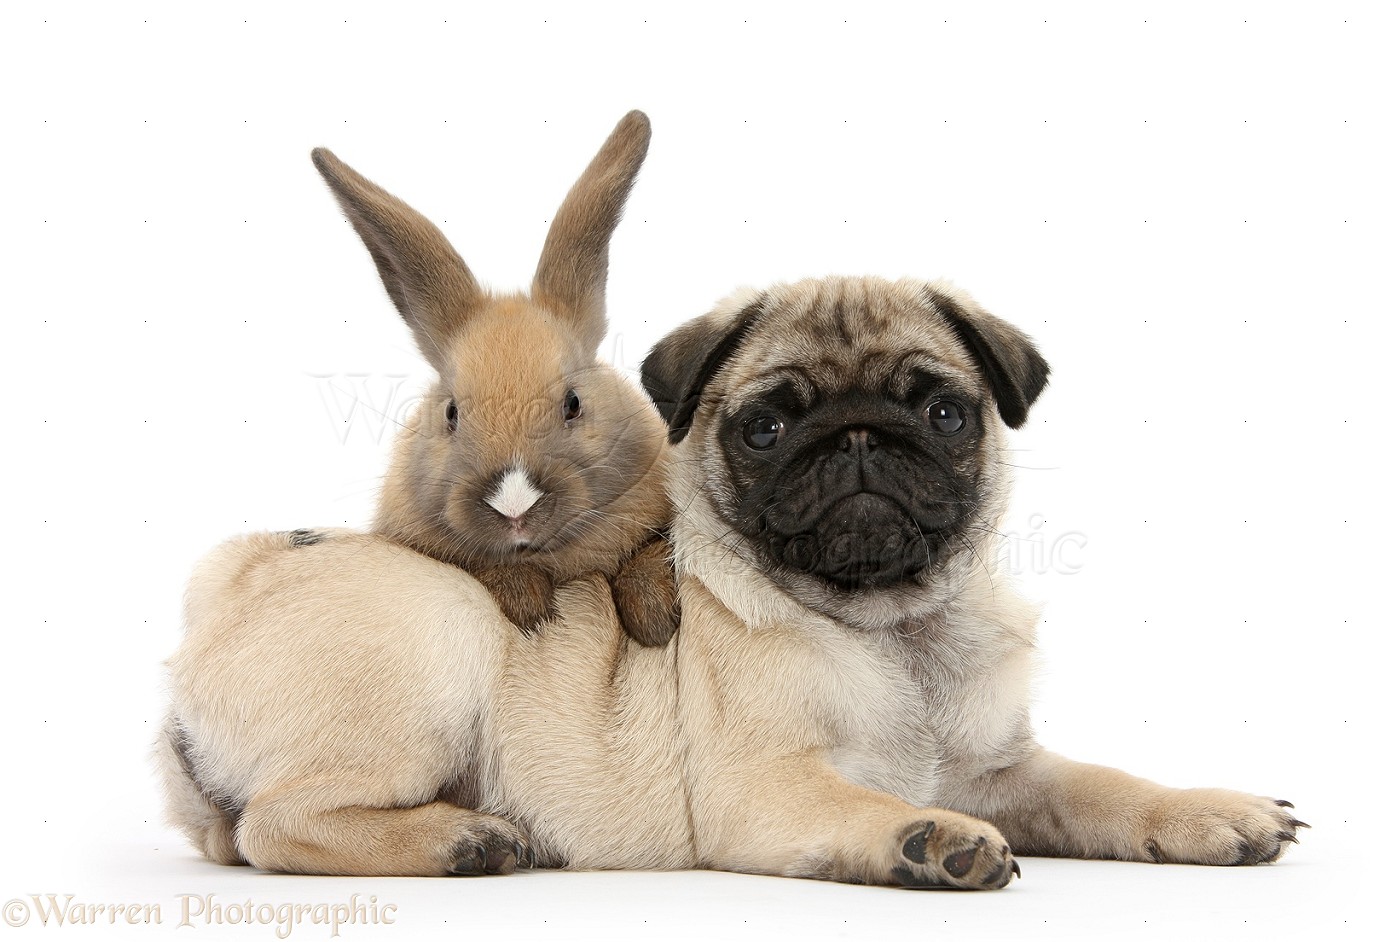 Fawn Pug Pup Weeks Old And Birman Cross Kitten Photo Wp26596 Picture